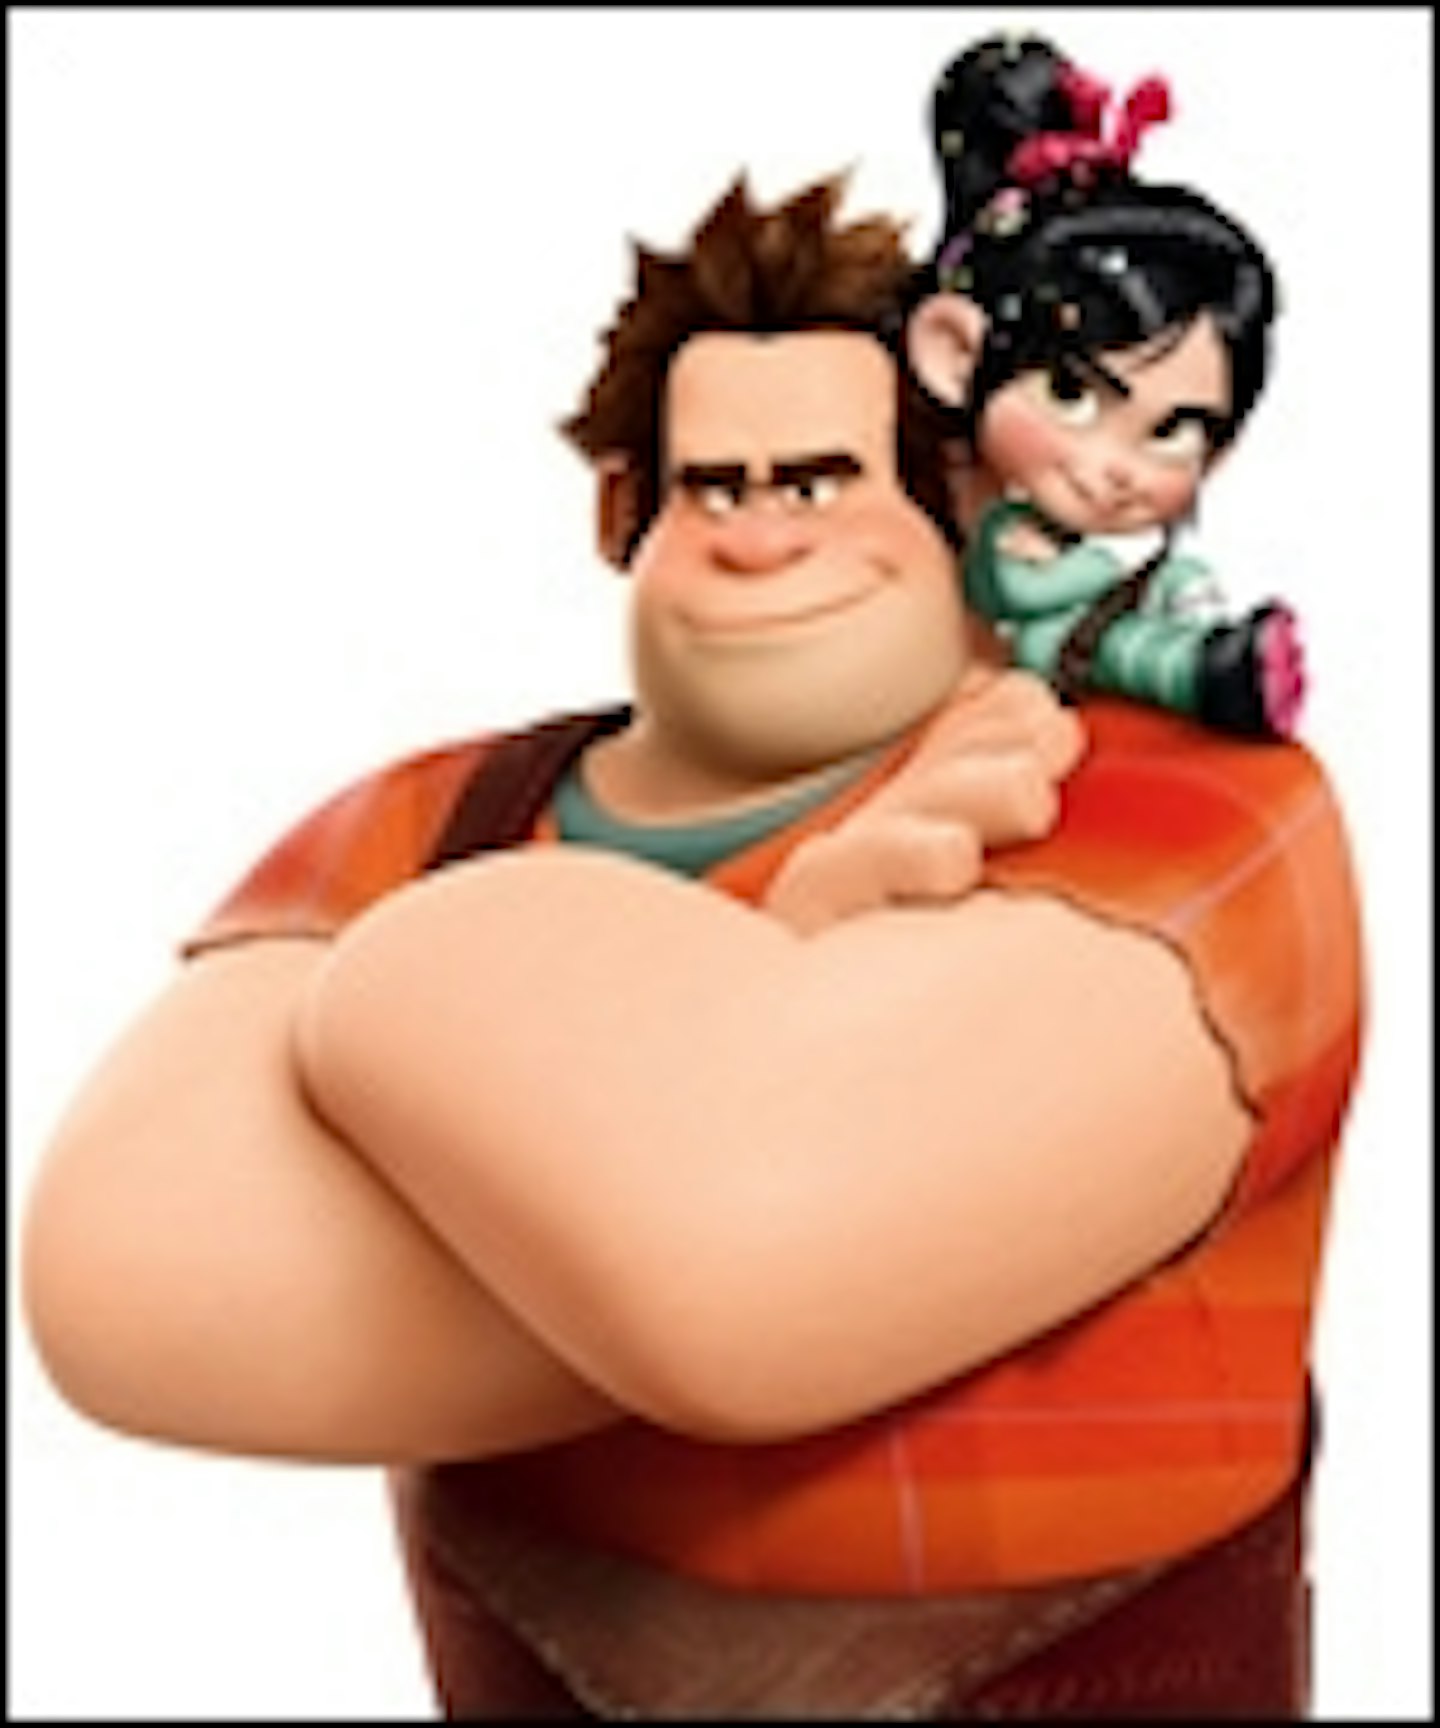 New Wreck-It Ralph Trailer Smashes In